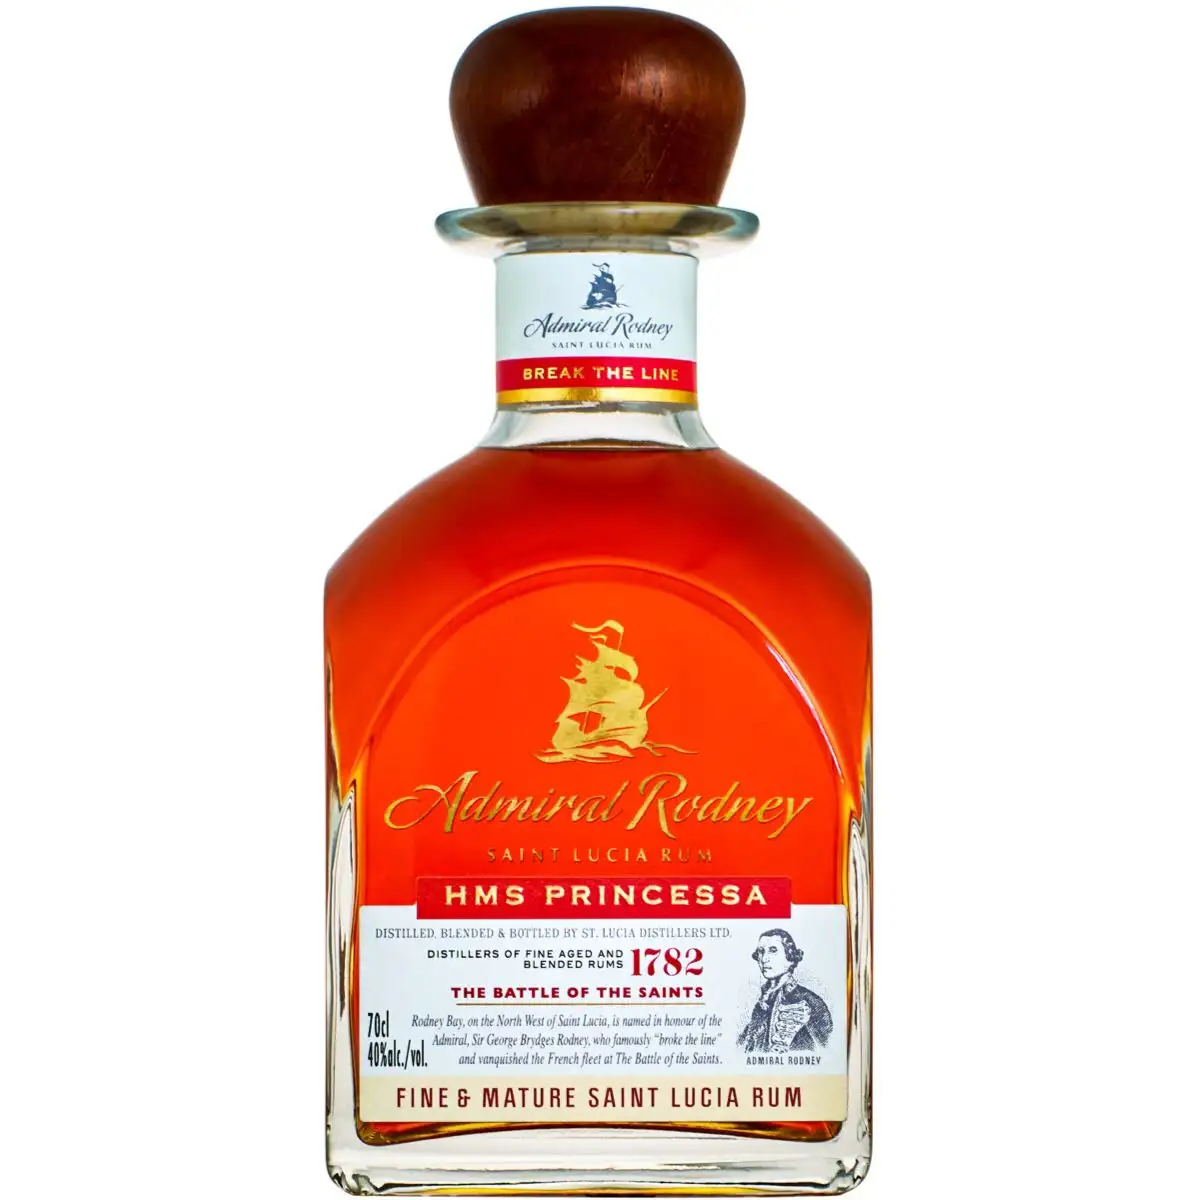 Image of the front of the bottle of the rum Admiral Rodney HMS Princessa